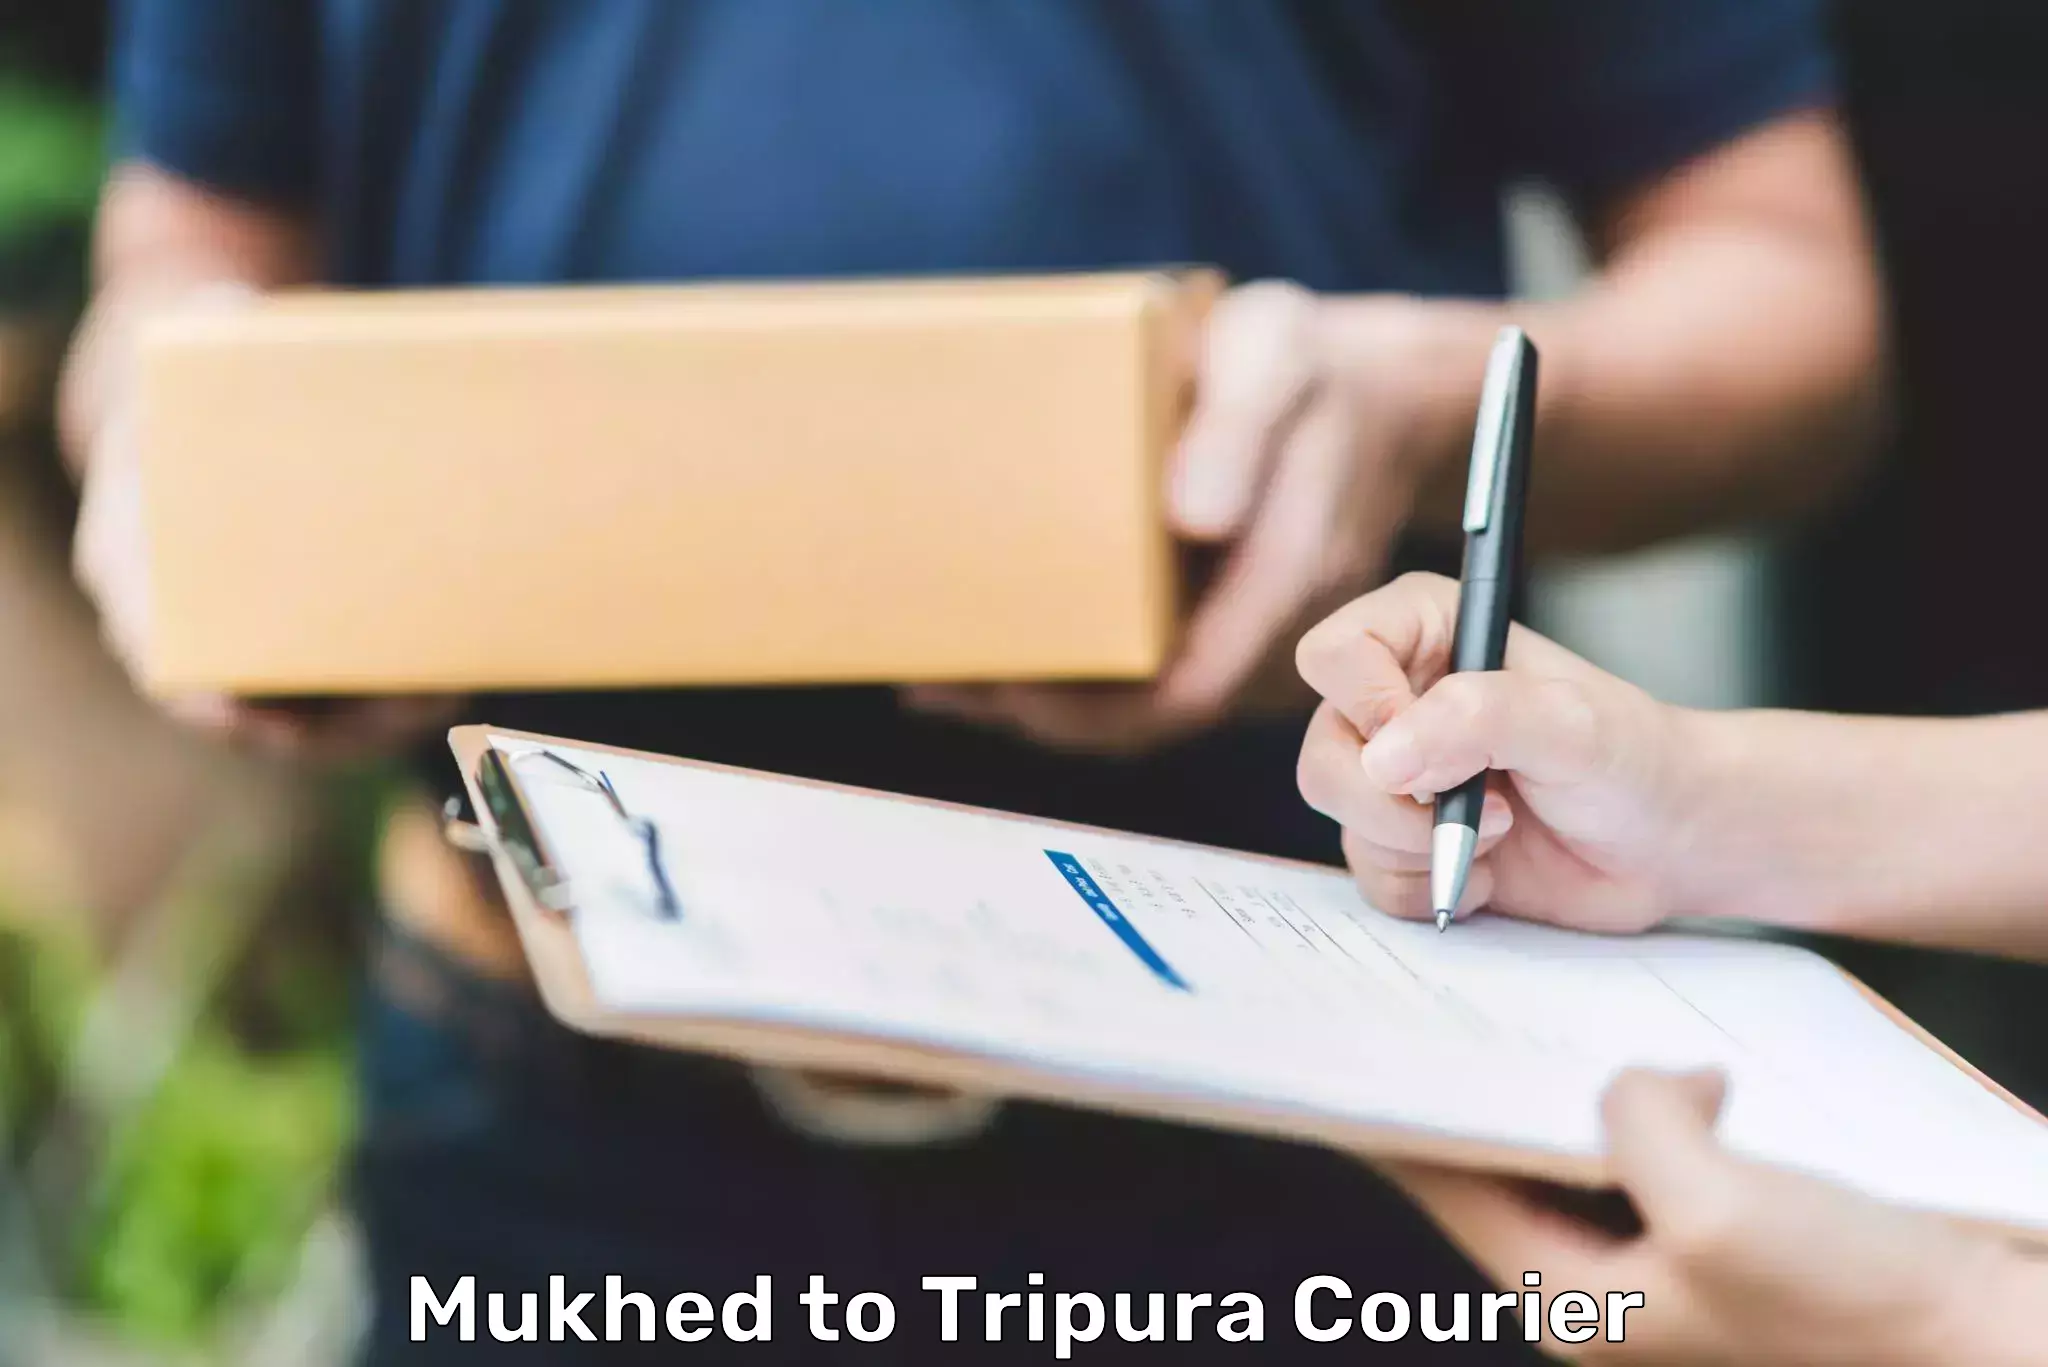 Local delivery service Mukhed to Tripura